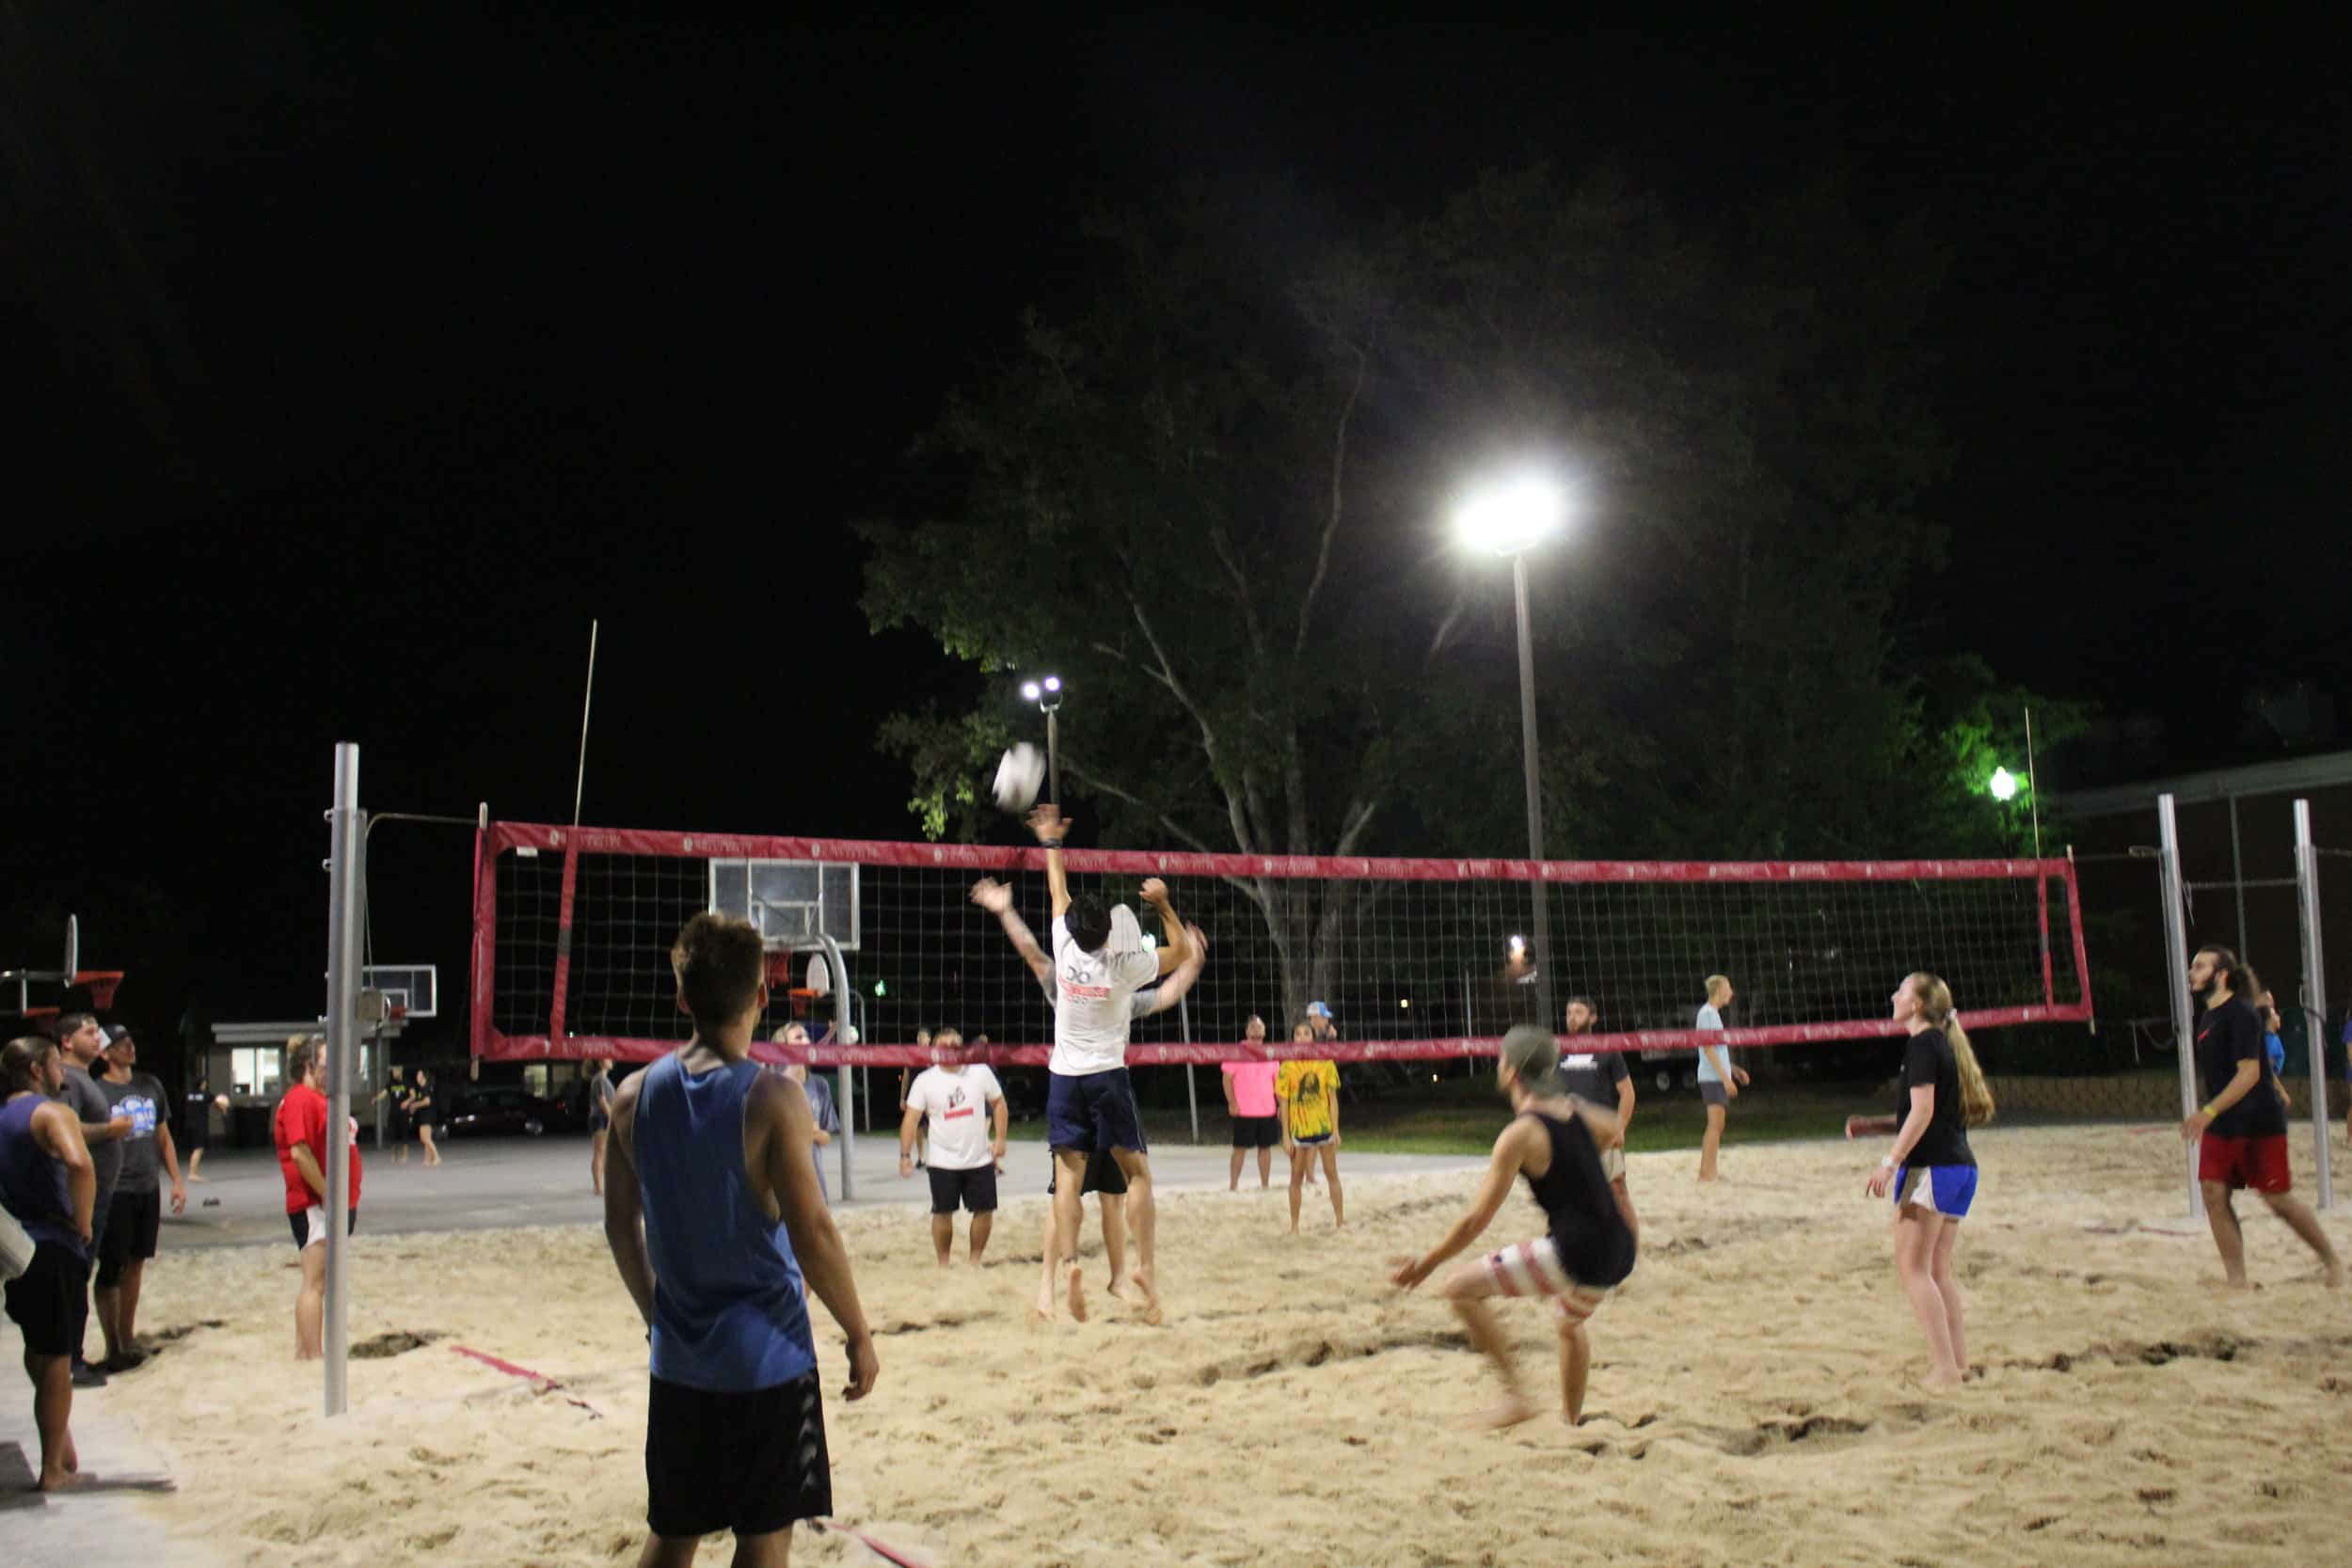 As a player from one team begins to spike the ball over the net, a player from the other team jumps in an attempt to block the spike.